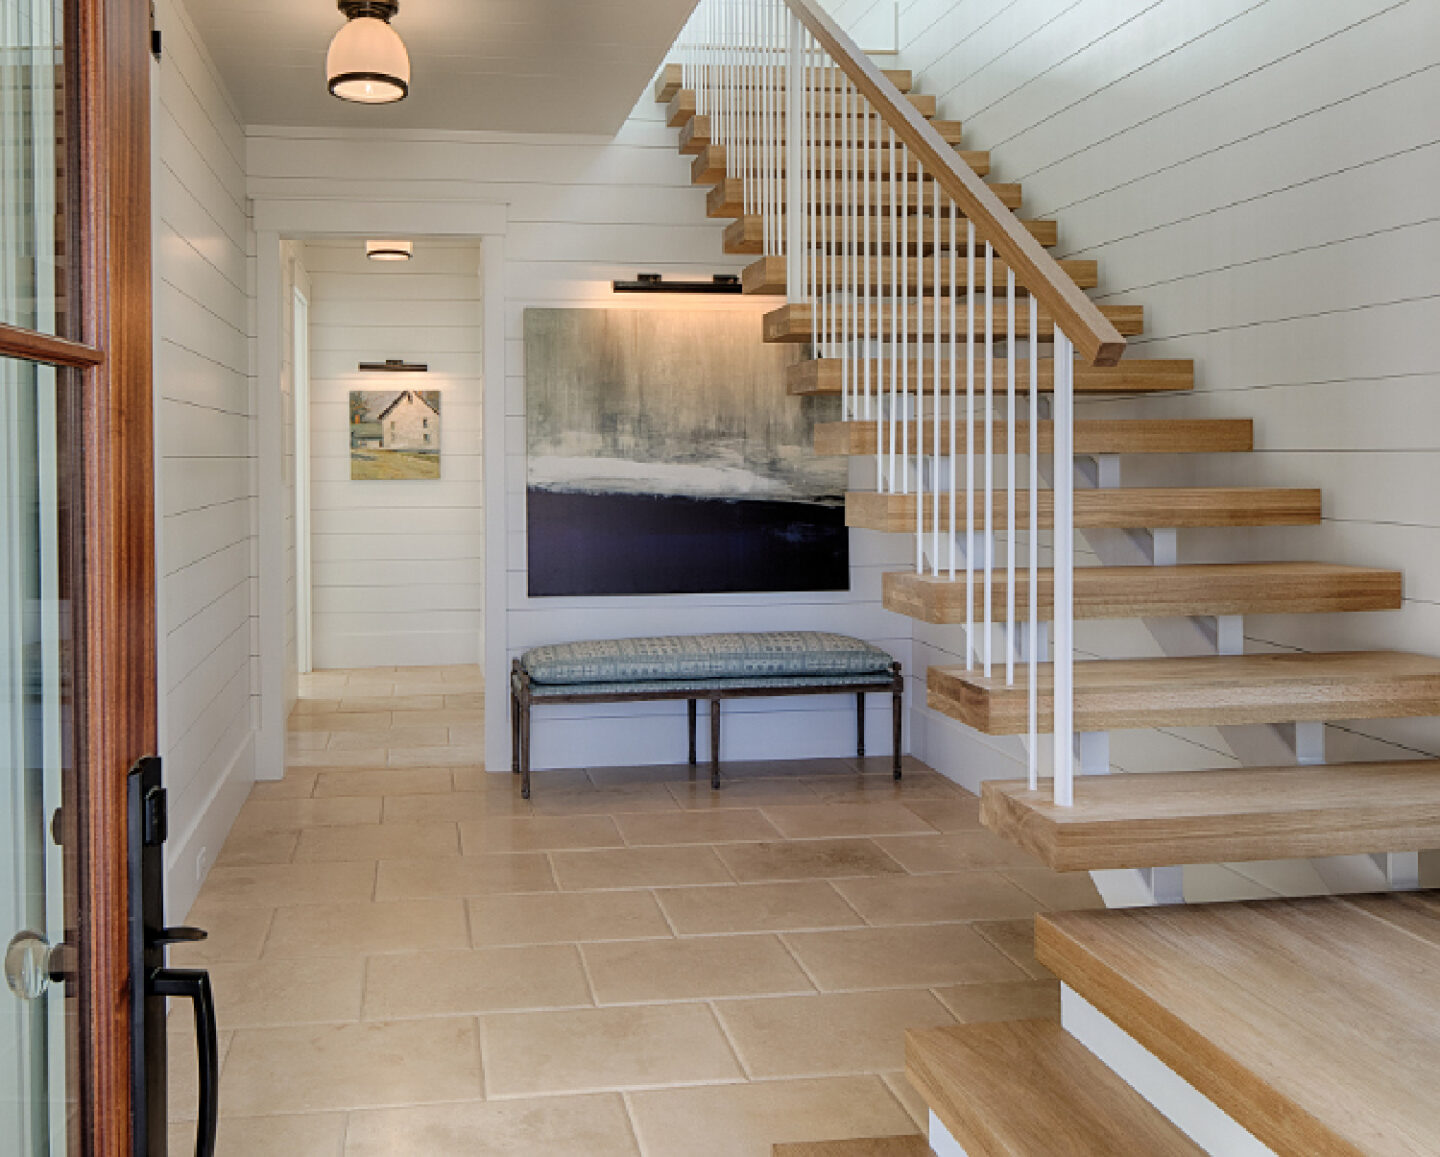 White oak hardwood flooring and floating staircase in entry with shiplap painted Benjamin Moore White. Board and batten coastal cottage in Palmetto Bluff with modern farmhouse interior design by Lisa Furey. #entry #openrisers #staircase #coastalstyle #interiordesign #modernfarmhouse #shiplap